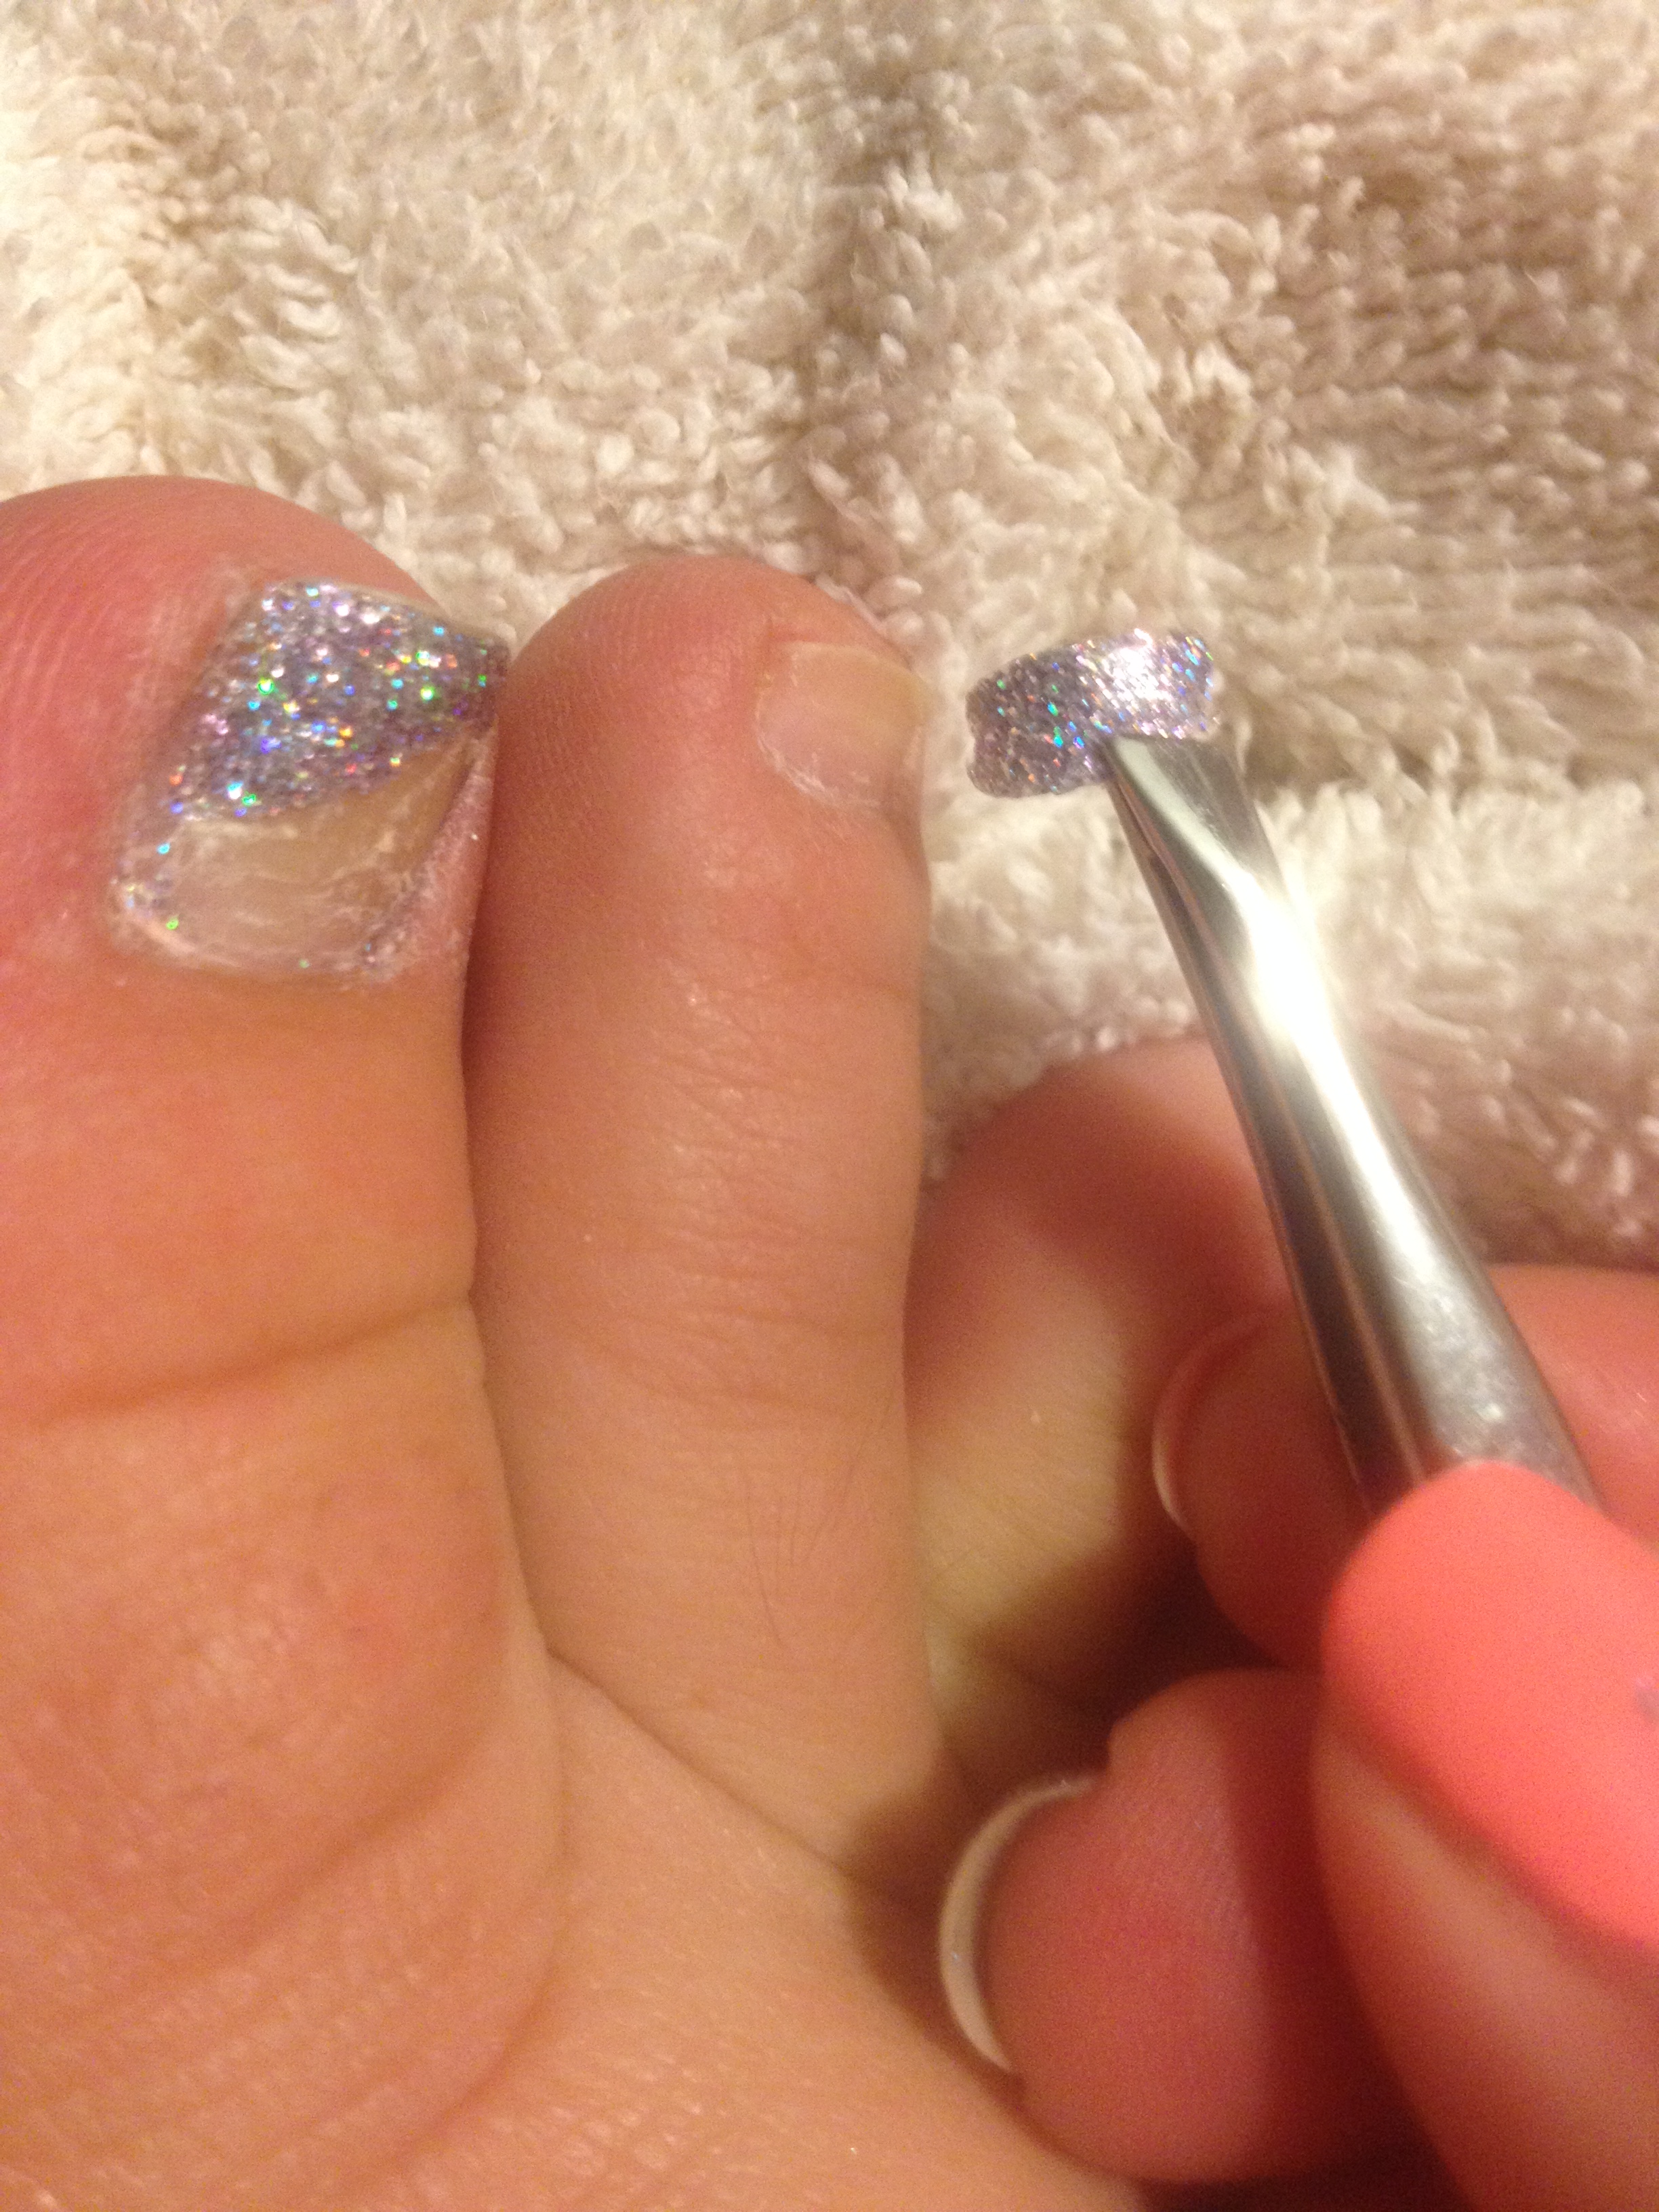 Toenail Falling Off: What to Do, Causes, and Recovery Time